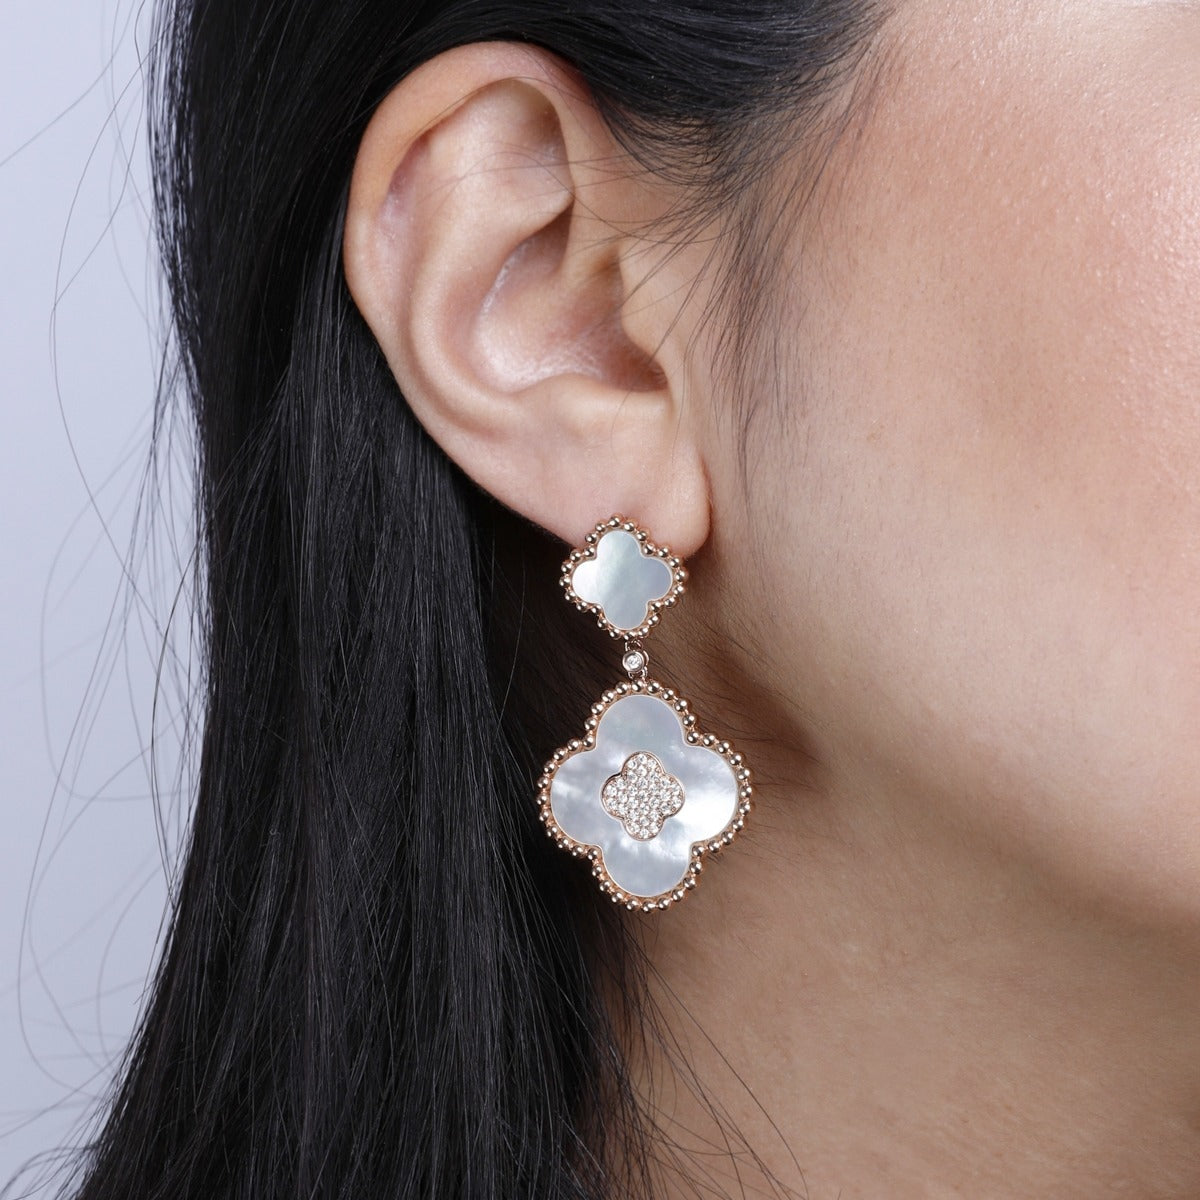 Luvente 14 Karat Rose Gold Diamond and White Mother of Pearl Double Clover Drop Earrings - Colored Stone Earrings